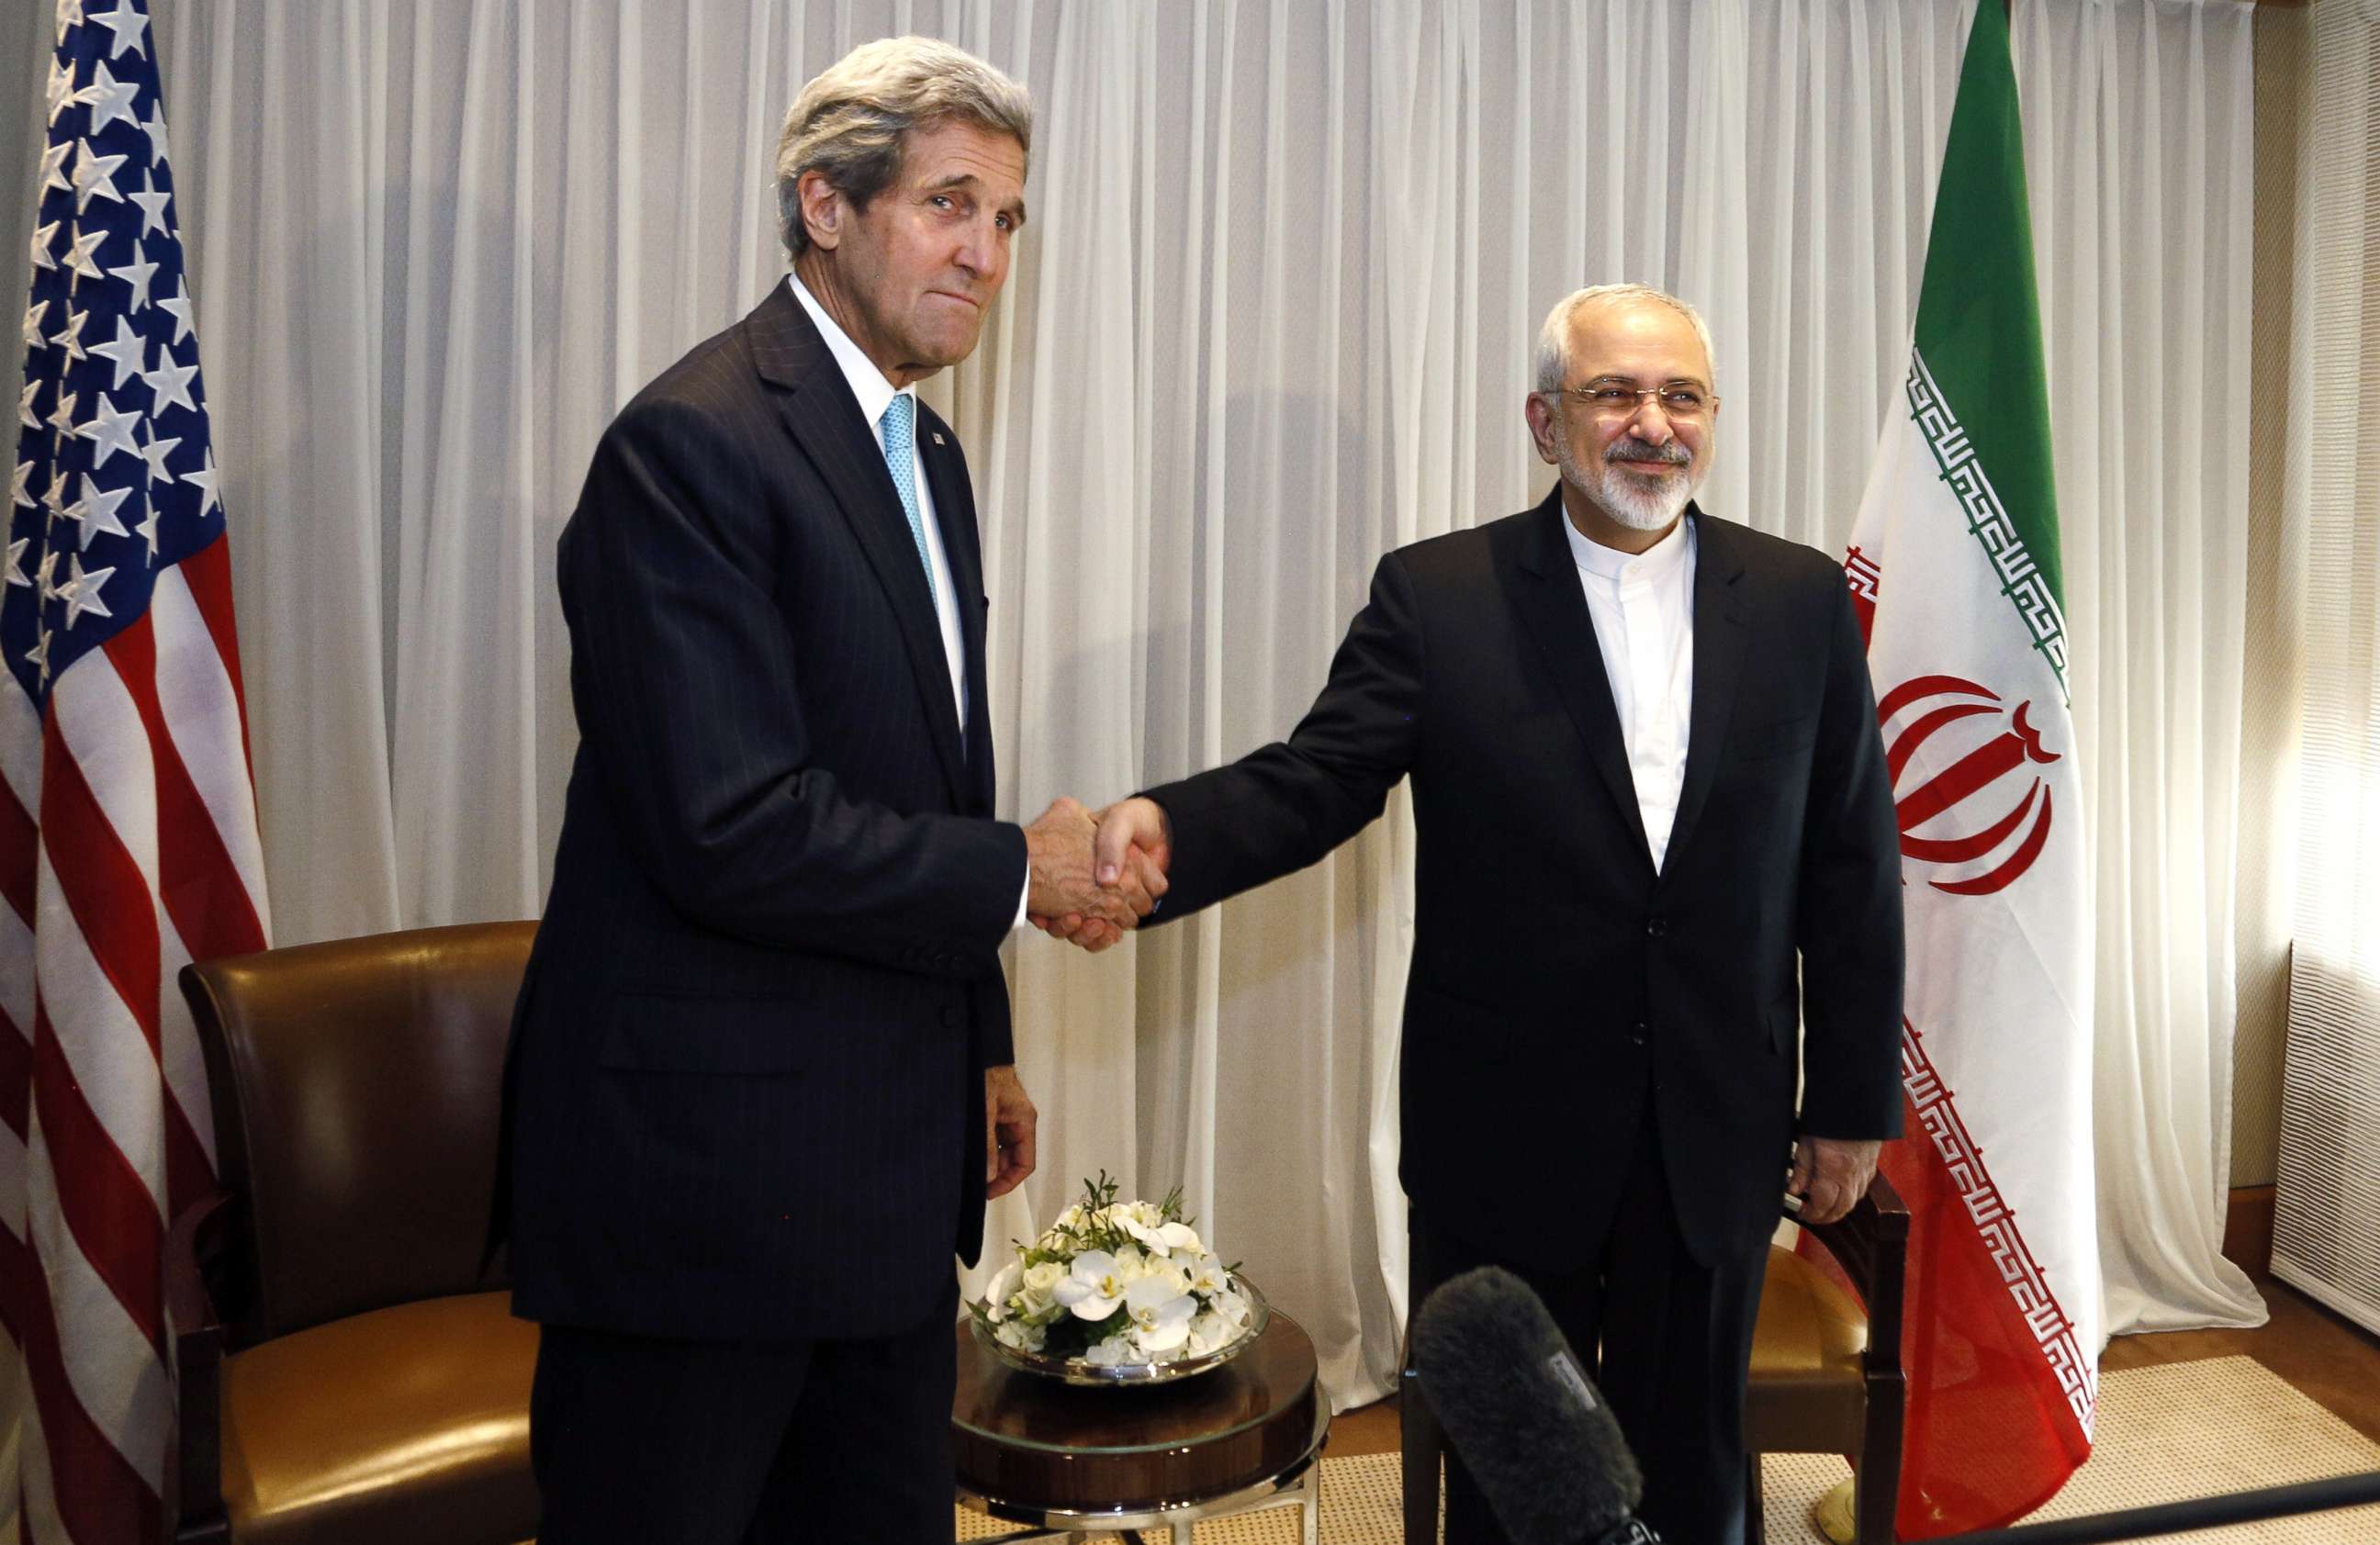 PHOTO: Iranian Foreign Minister Mohammad Javad Zarif shakes hands with then-U.S. Secretary of State John Kerry in Geneva, Jan. 14, 2015.